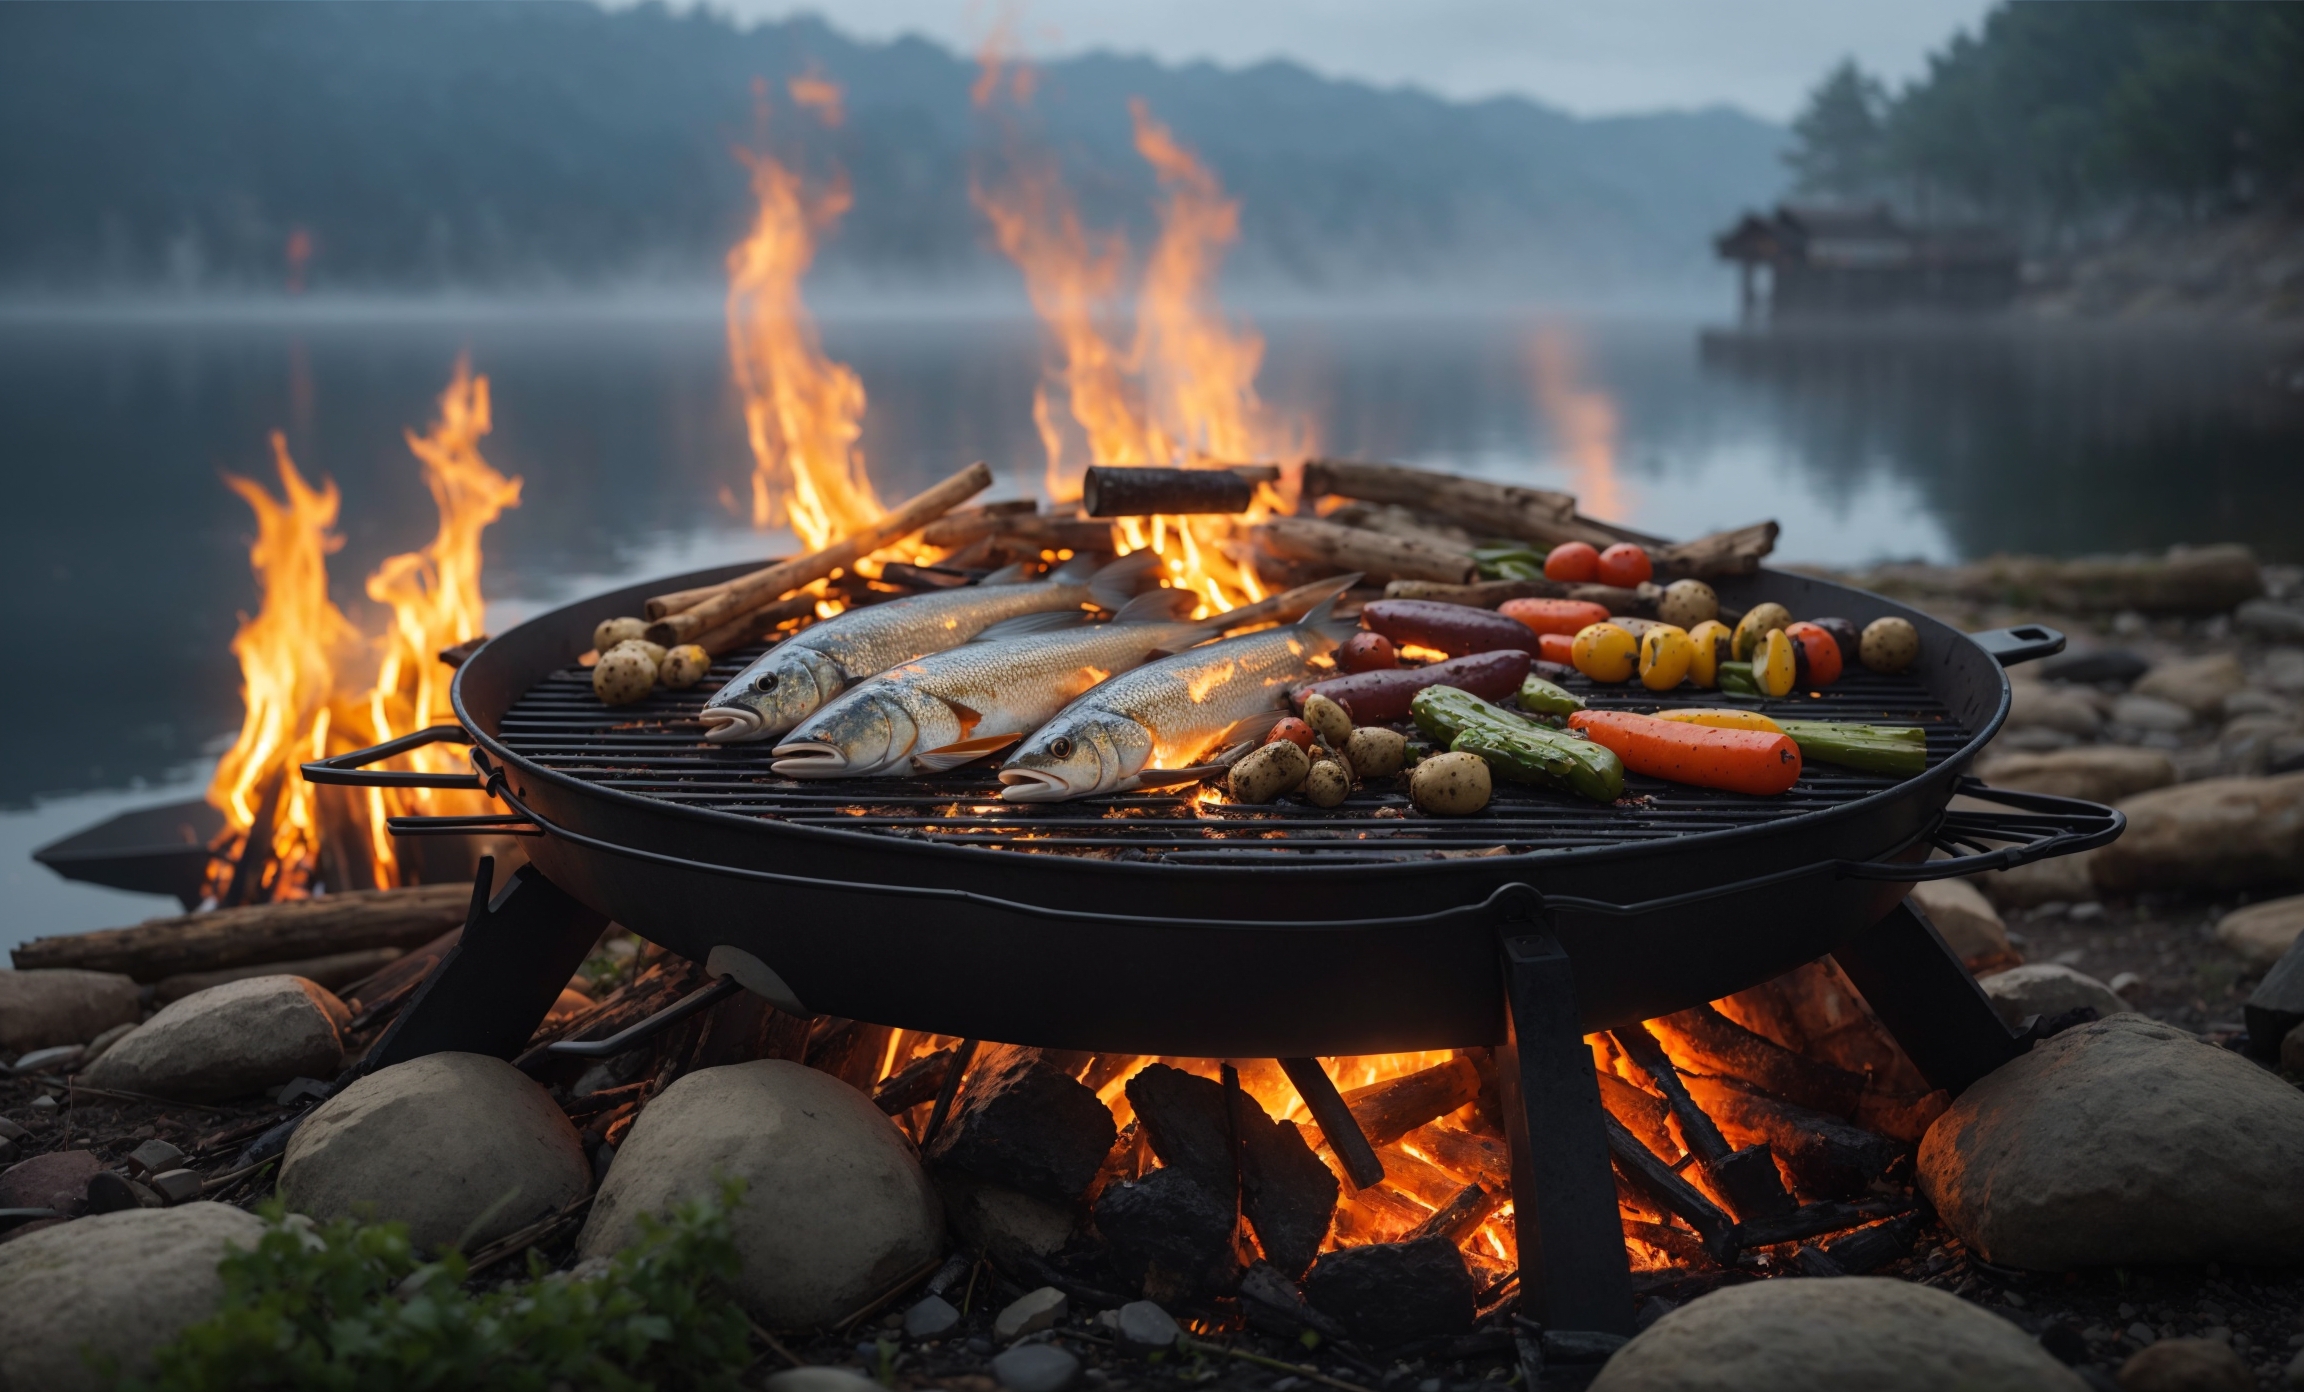 Campfire Cooking tools, a gridiron with various fish and veggies placed directly over the fire